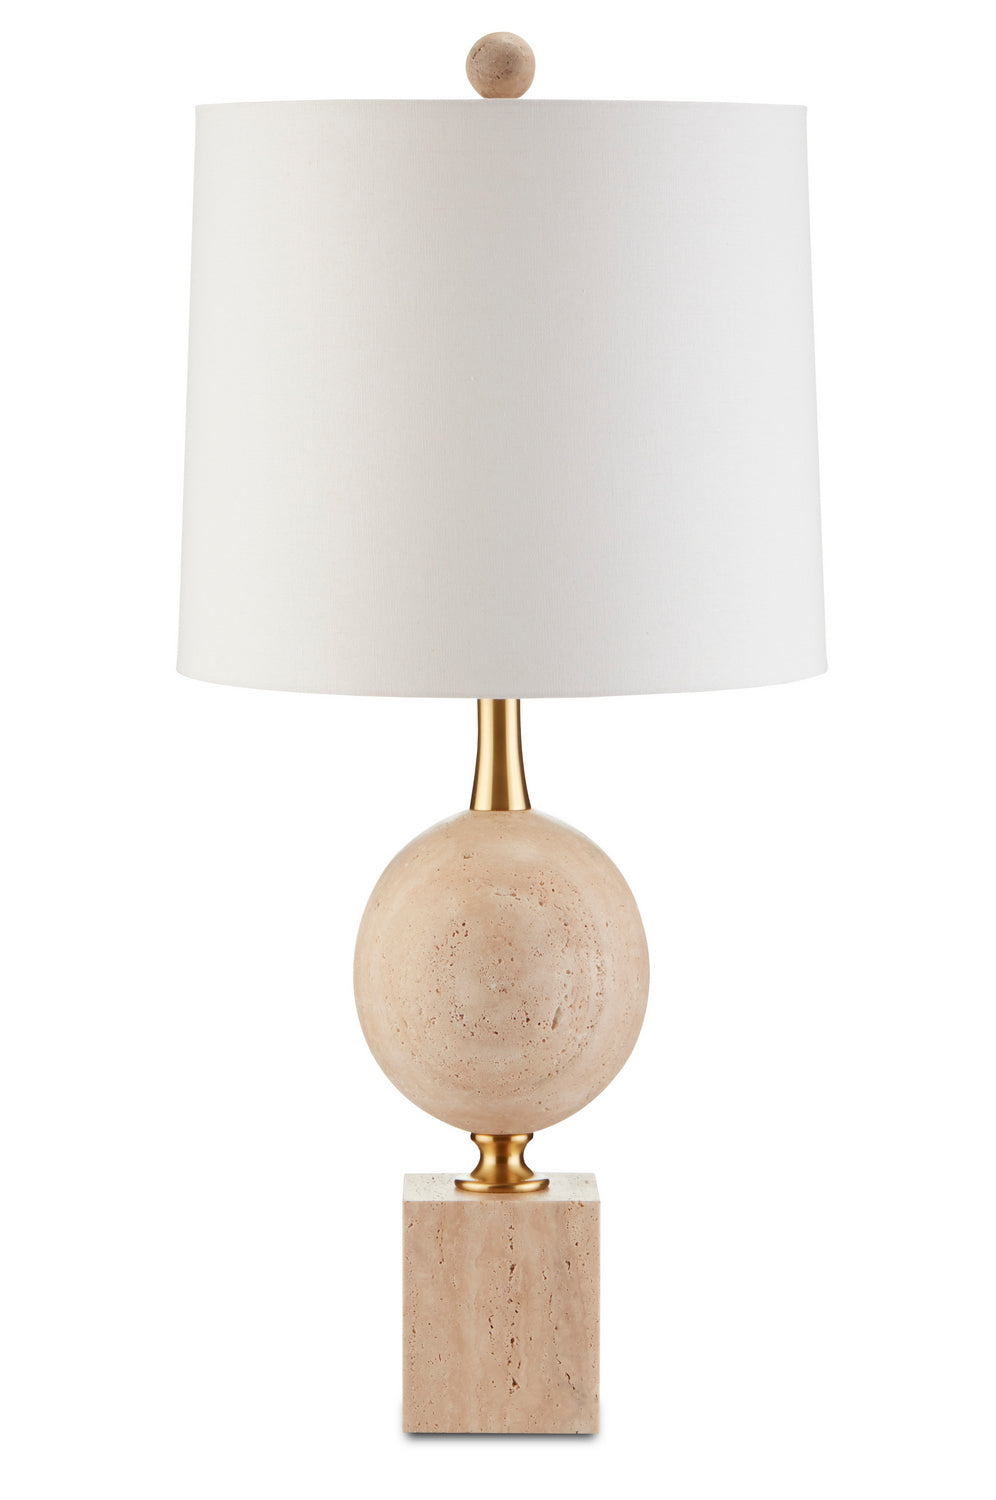 One Light Table Lamp from the Adorno collection in Natural/Beige/Antique Brass finish